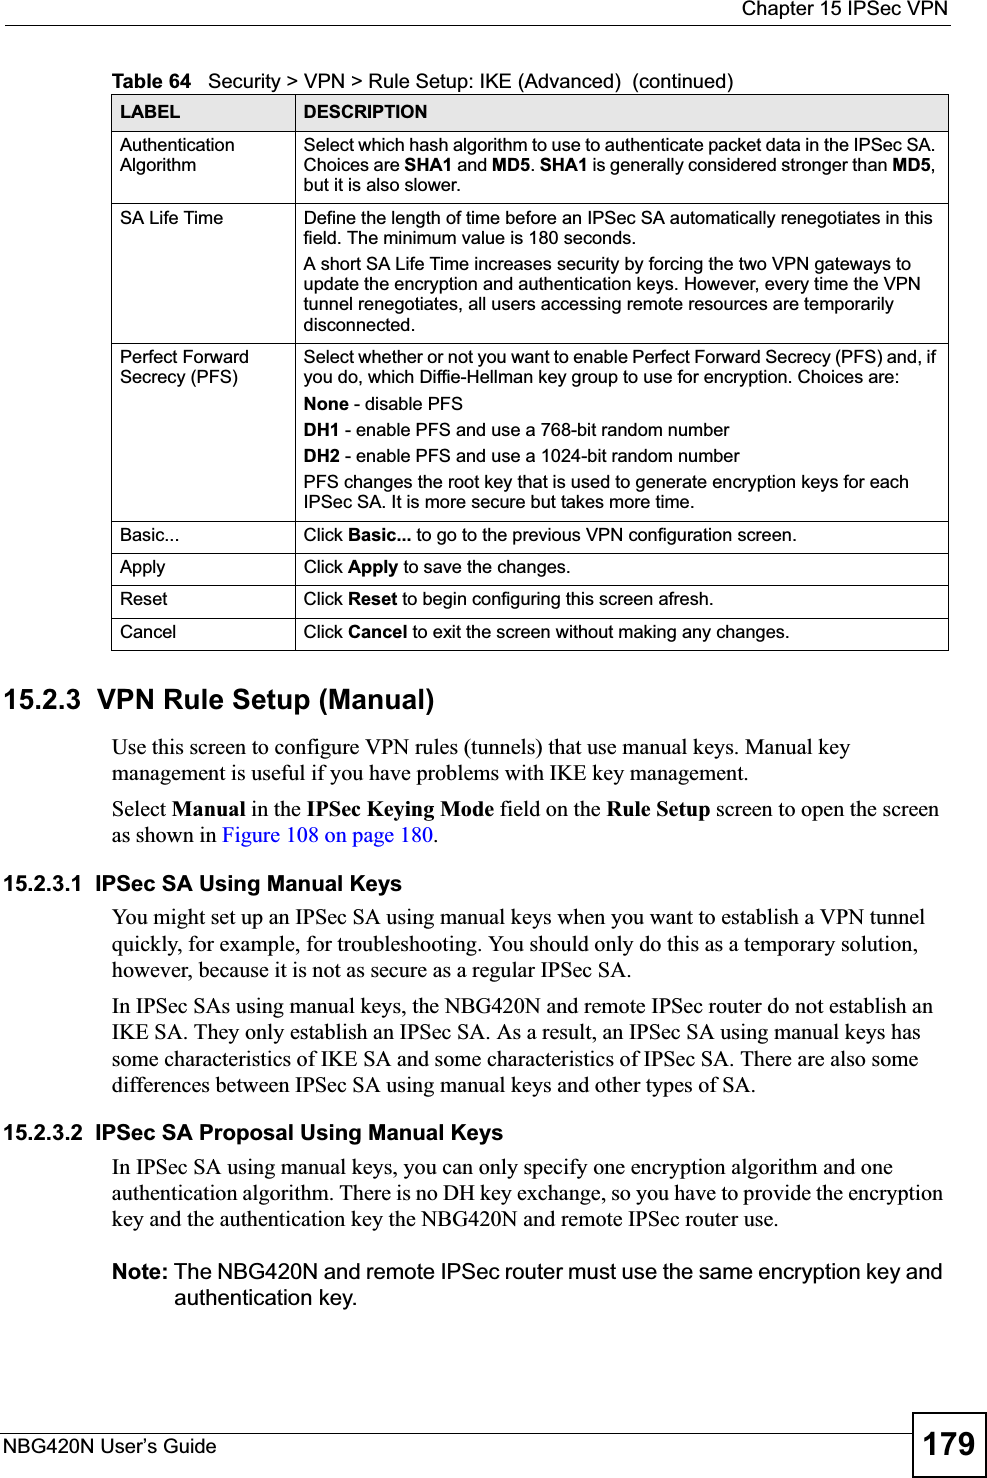  Chapter 15 IPSec VPNNBG420N User’s Guide 17915.2.3  VPN Rule Setup (Manual)Use this screen to configure VPN rules (tunnels) that use manual keys. Manual key management is useful if you have problems with IKE key management.Select Manual in the IPSec Keying Mode field on the Rule Setup screen to open the screen as shown in Figure 108 on page 180.15.2.3.1  IPSec SA Using Manual Keys    You might set up an IPSec SA using manual keys when you want to establish a VPN tunnel quickly, for example, for troubleshooting. You should only do this as a temporary solution, however, because it is not as secure as a regular IPSec SA.In IPSec SAs using manual keys, the NBG420N and remote IPSec router do not establish an IKE SA. They only establish an IPSec SA. As a result, an IPSec SA using manual keys has some characteristics of IKE SA and some characteristics of IPSec SA. There are also some differences between IPSec SA using manual keys and other types of SA.15.2.3.2  IPSec SA Proposal Using Manual KeysIn IPSec SA using manual keys, you can only specify one encryption algorithm and one authentication algorithm. There is no DH key exchange, so you have to provide the encryption key and the authentication key the NBG420N and remote IPSec router use.Note: The NBG420N and remote IPSec router must use the same encryption key and authentication key.Authentication AlgorithmSelect which hash algorithm to use to authenticate packet data in the IPSec SA. Choices are SHA1 and MD5.SHA1 is generally considered stronger than MD5,but it is also slower.SA Life Time  Define the length of time before an IPSec SA automatically renegotiates in this field. The minimum value is 180 seconds.A short SA Life Time increases security by forcing the two VPN gateways to update the encryption and authentication keys. However, every time the VPN tunnel renegotiates, all users accessing remote resources are temporarily disconnected.Perfect Forward Secrecy (PFS)Select whether or not you want to enable Perfect Forward Secrecy (PFS) and, if you do, which Diffie-Hellman key group to use for encryption. Choices are:None - disable PFSDH1 - enable PFS and use a 768-bit random numberDH2 - enable PFS and use a 1024-bit random numberPFS changes the root key that is used to generate encryption keys for each IPSec SA. It is more secure but takes more time.Basic... Click Basic... to go to the previous VPN configuration screen. Apply Click Apply to save the changes. Reset Click Reset to begin configuring this screen afresh.Cancel Click Cancel to exit the screen without making any changes.Table 64   Security &gt; VPN &gt; Rule Setup: IKE (Advanced)  (continued)LABEL DESCRIPTION